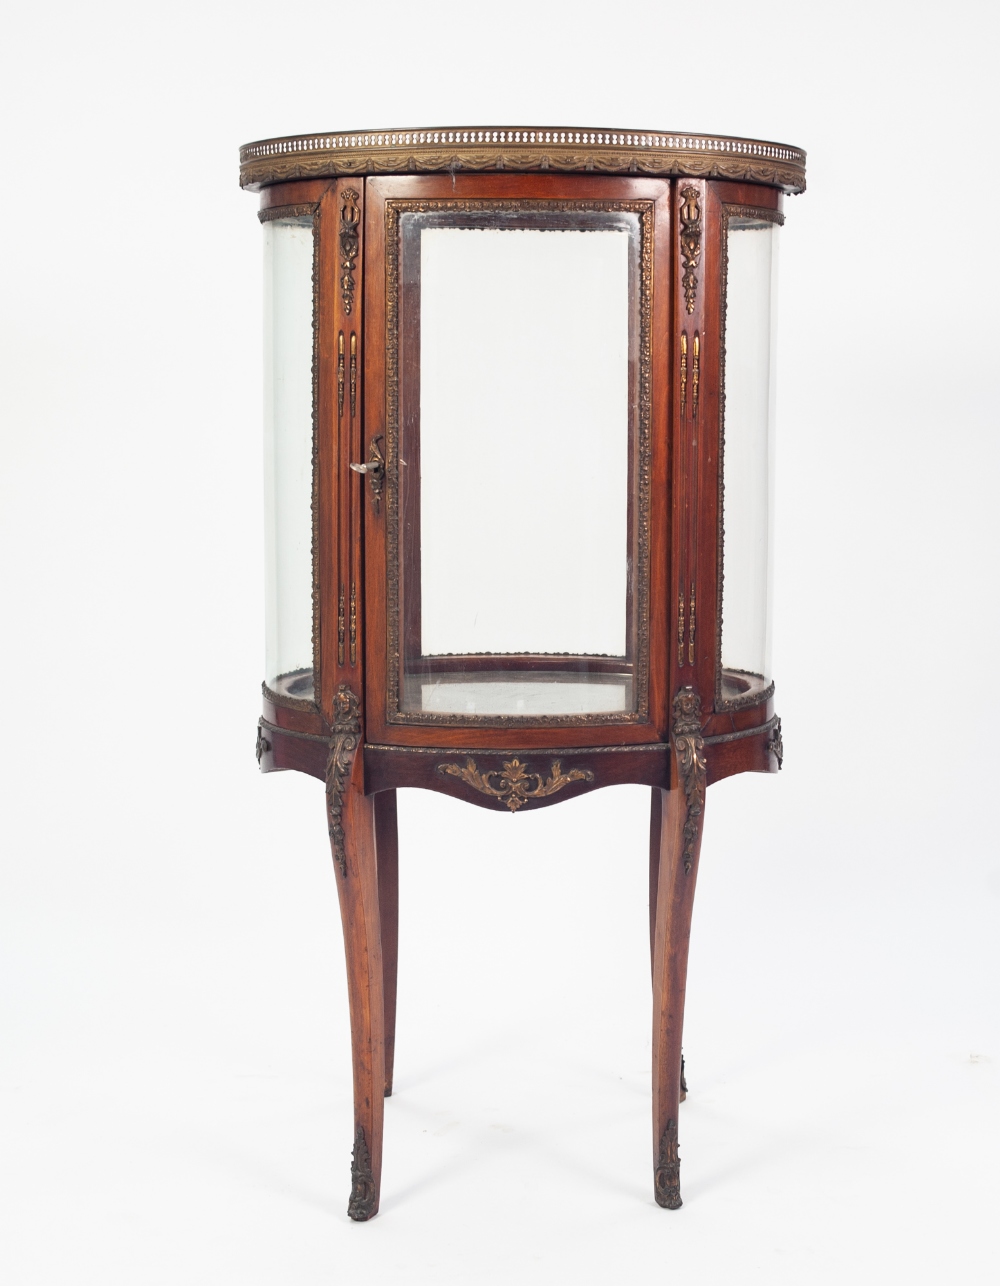 LATE NINETEENTH CENTURY MAHOGANY AND GILT METAL MOUNTED SMALL OVAL VITRINE, the top inset with an